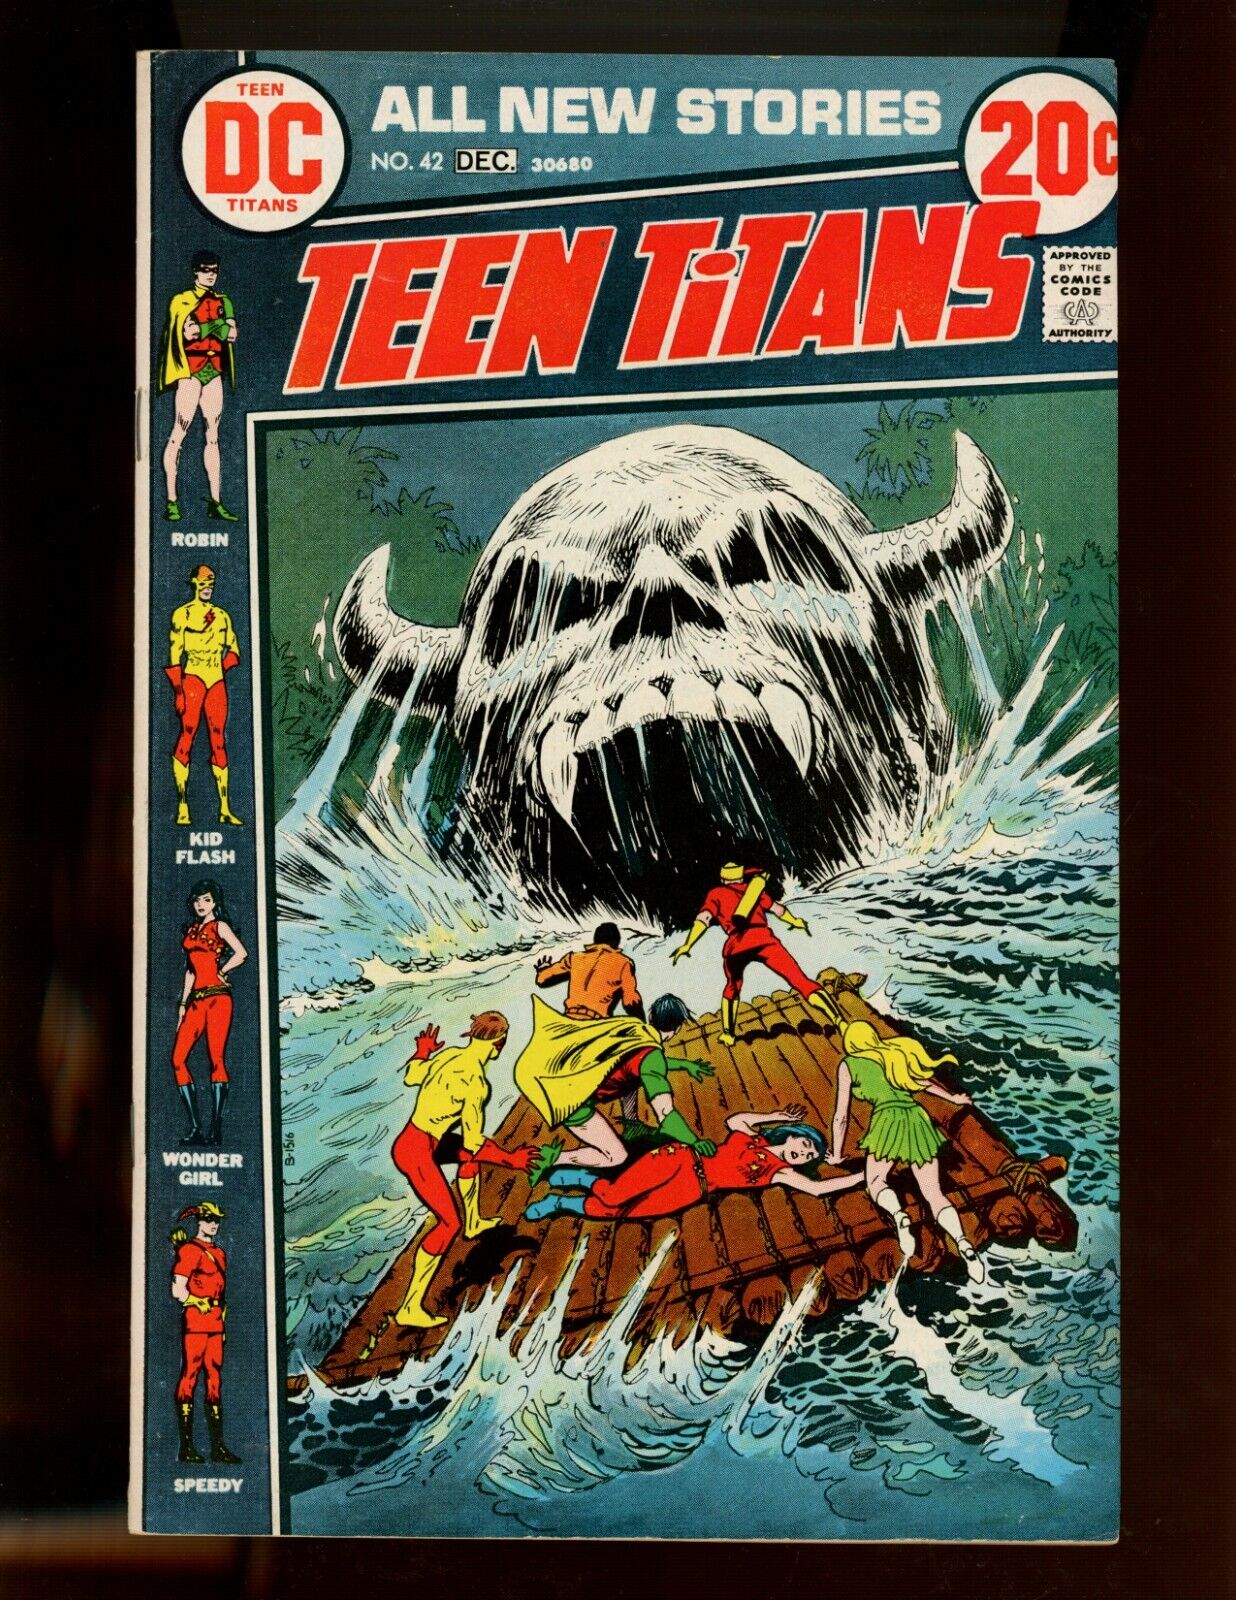 (1972) Teen Titans #42 - "ALL NEW STORIES" (6.5/7.0)